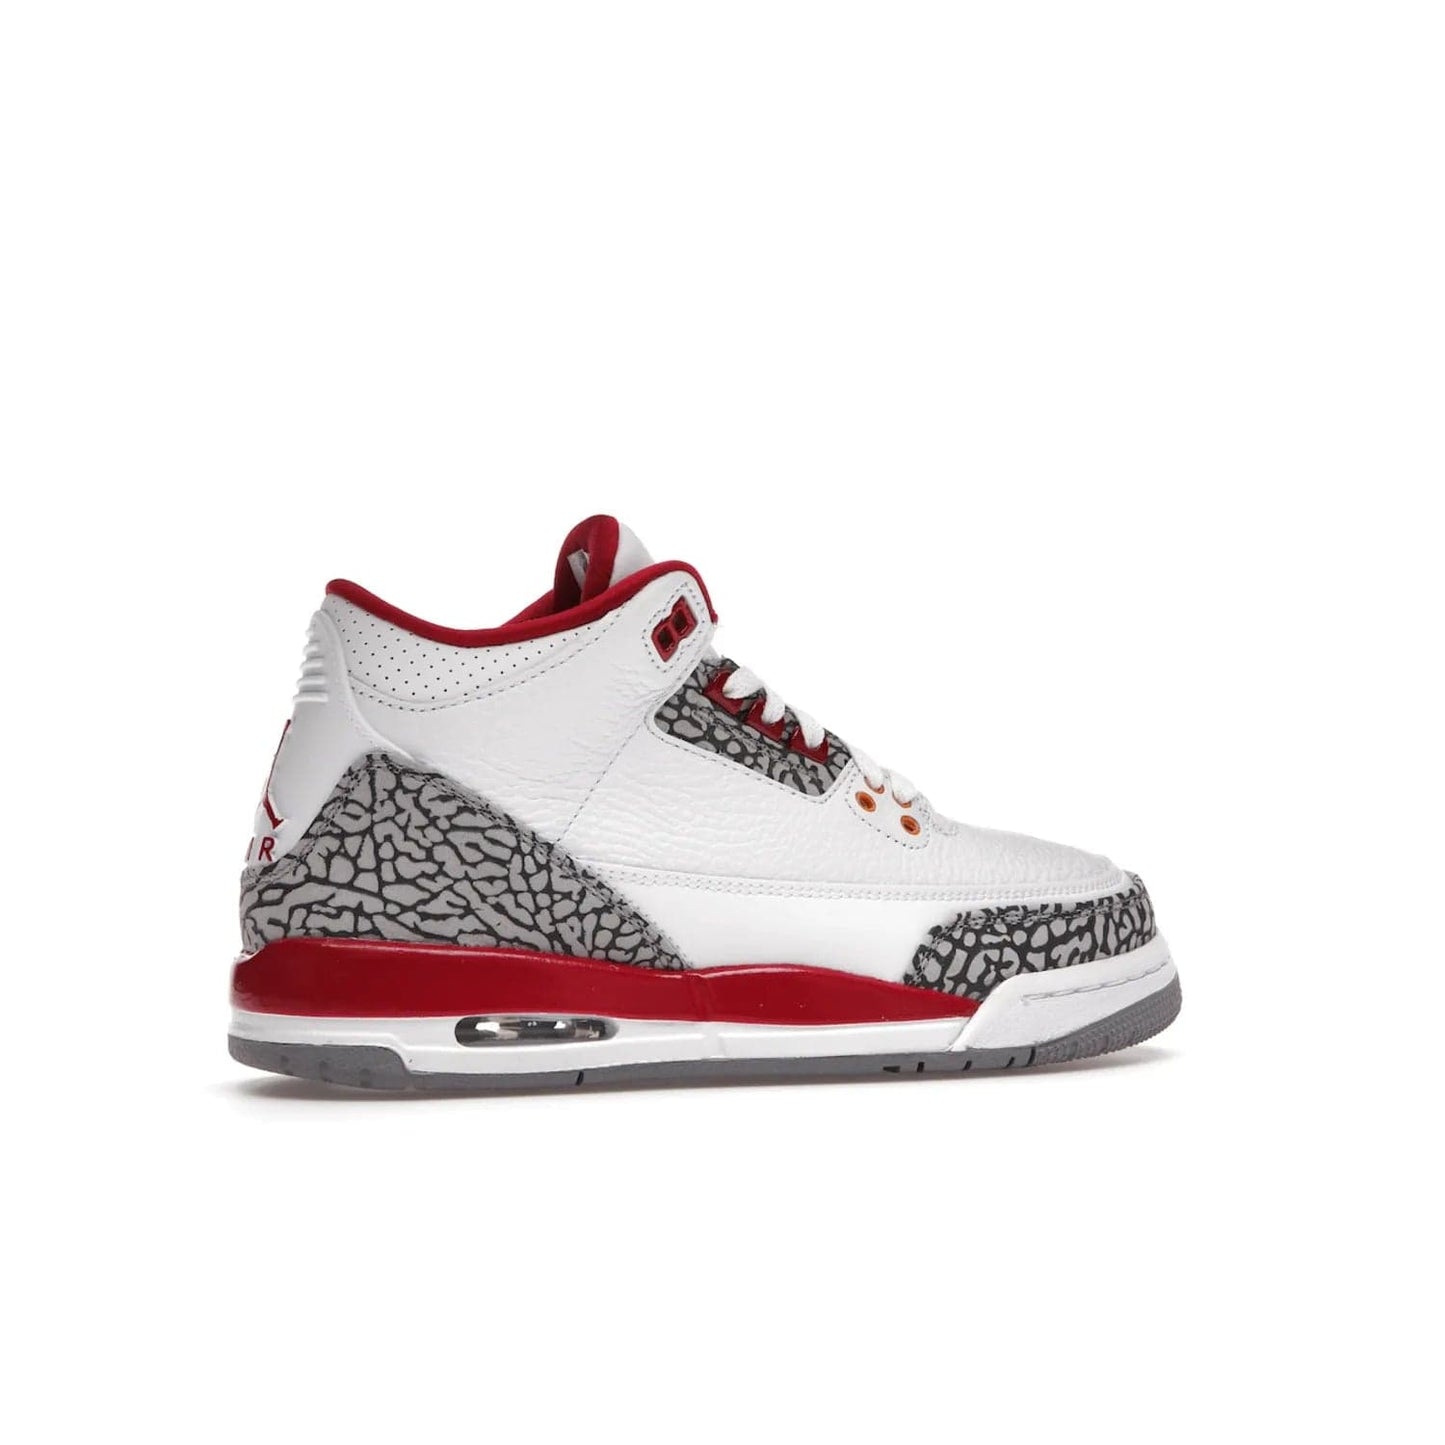 Jordan 3 Retro Cardinal (GS) - Image 35 - Only at www.BallersClubKickz.com - Shop the kid-sized Air Jordan 3 Retro Cardinal GS, released Feb 2022. White tumbled leather upper, light curry accenting, cement grey and classic red details throughout. Visible Air cushioning, midsole, and an eye-catching outsole. Show off your style with this fashionable streetwear silhouette.